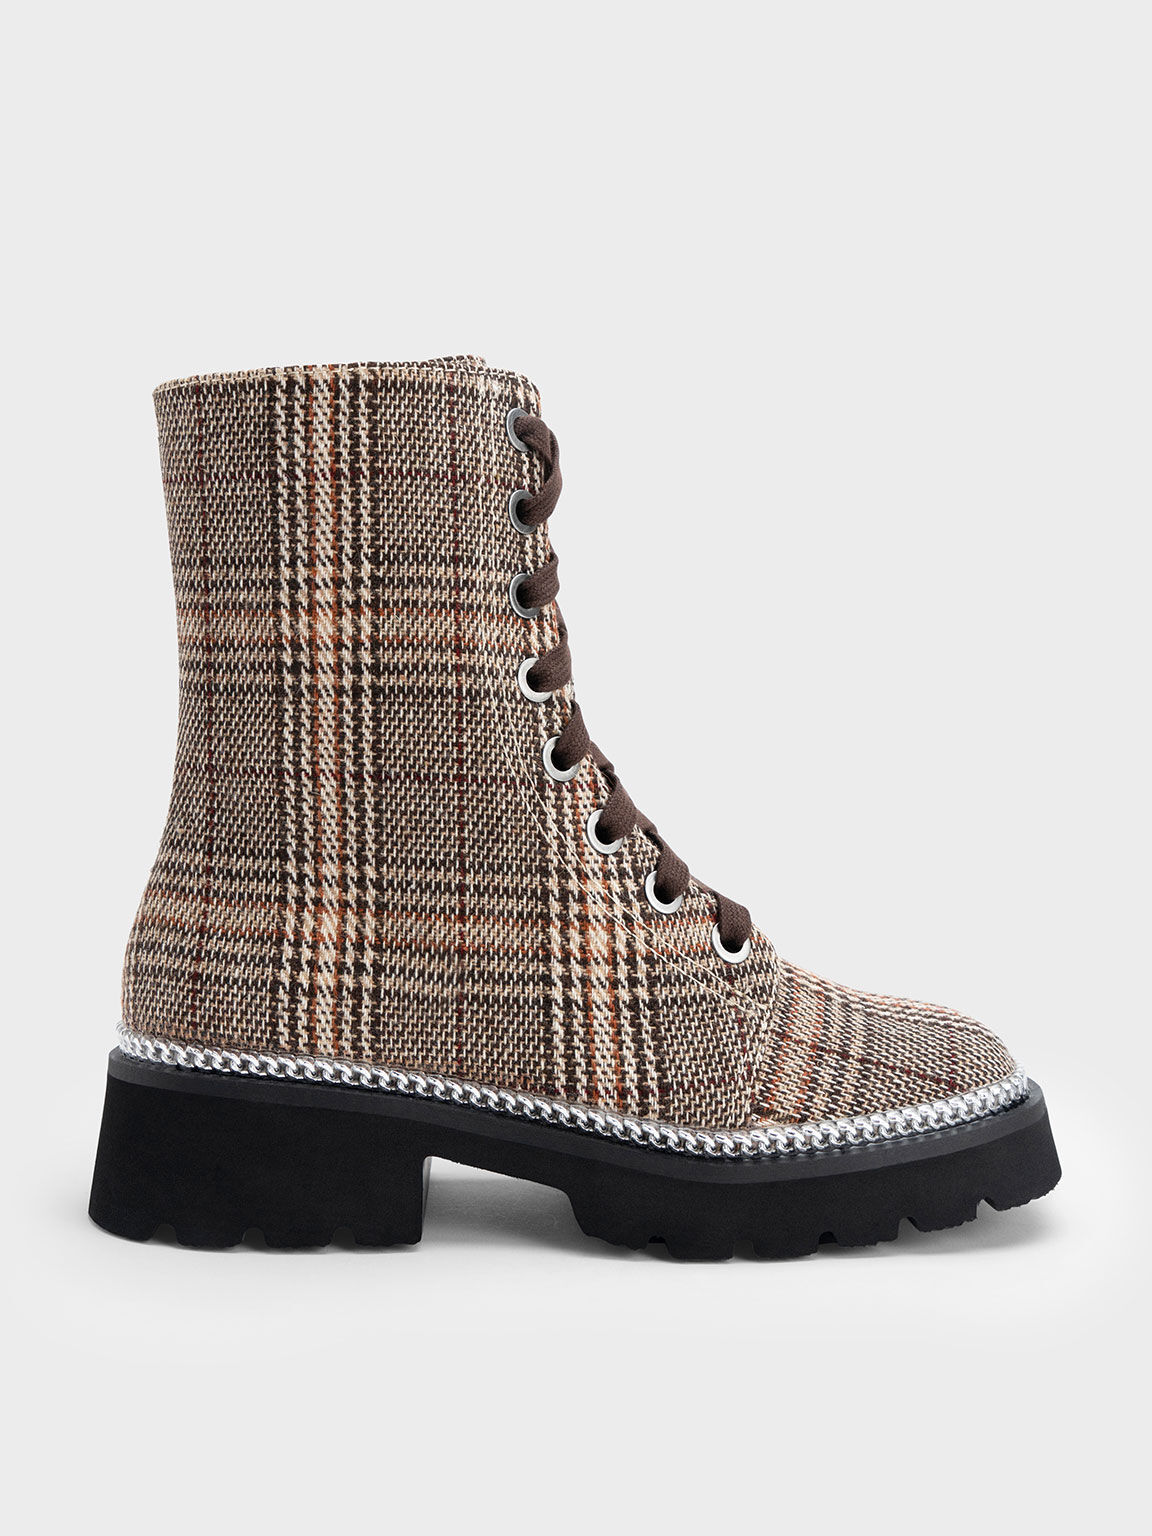 Checkered Chain-Trim Lace-Up Boots, Dark Brown, hi-res